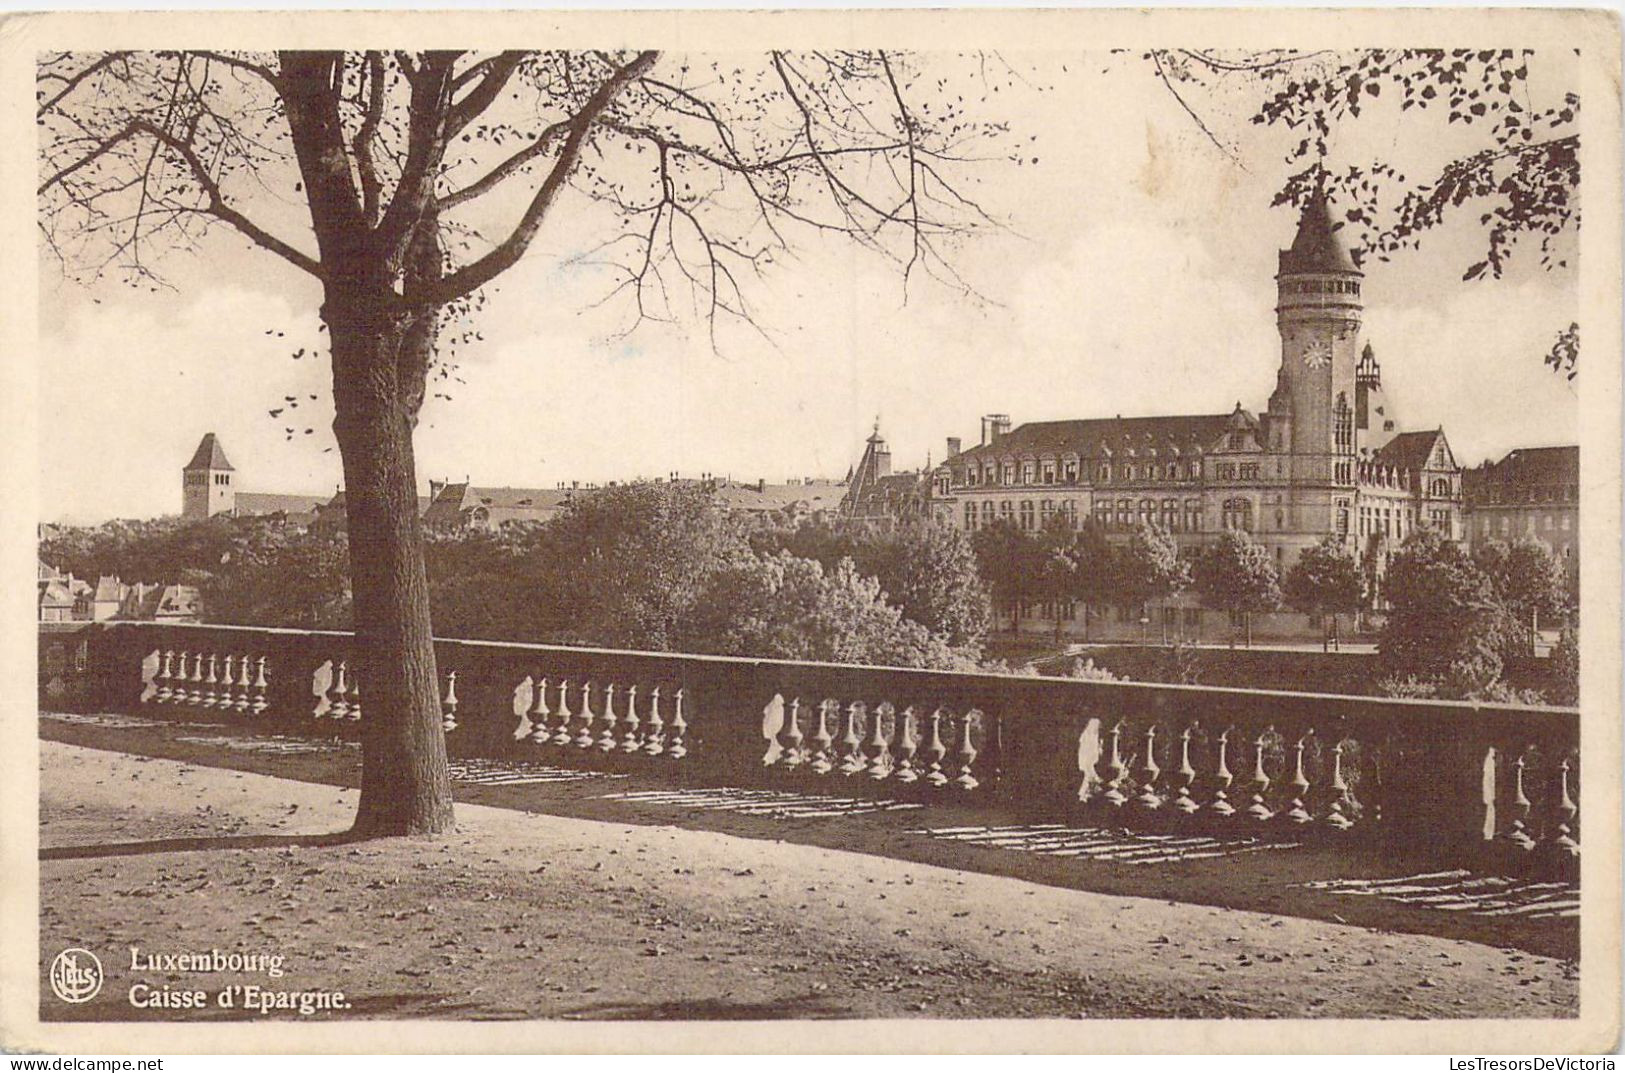 LUXEMBOURG - Caisse D'Epargne - Carte Postale Ancienne - Luxemburg - Stadt